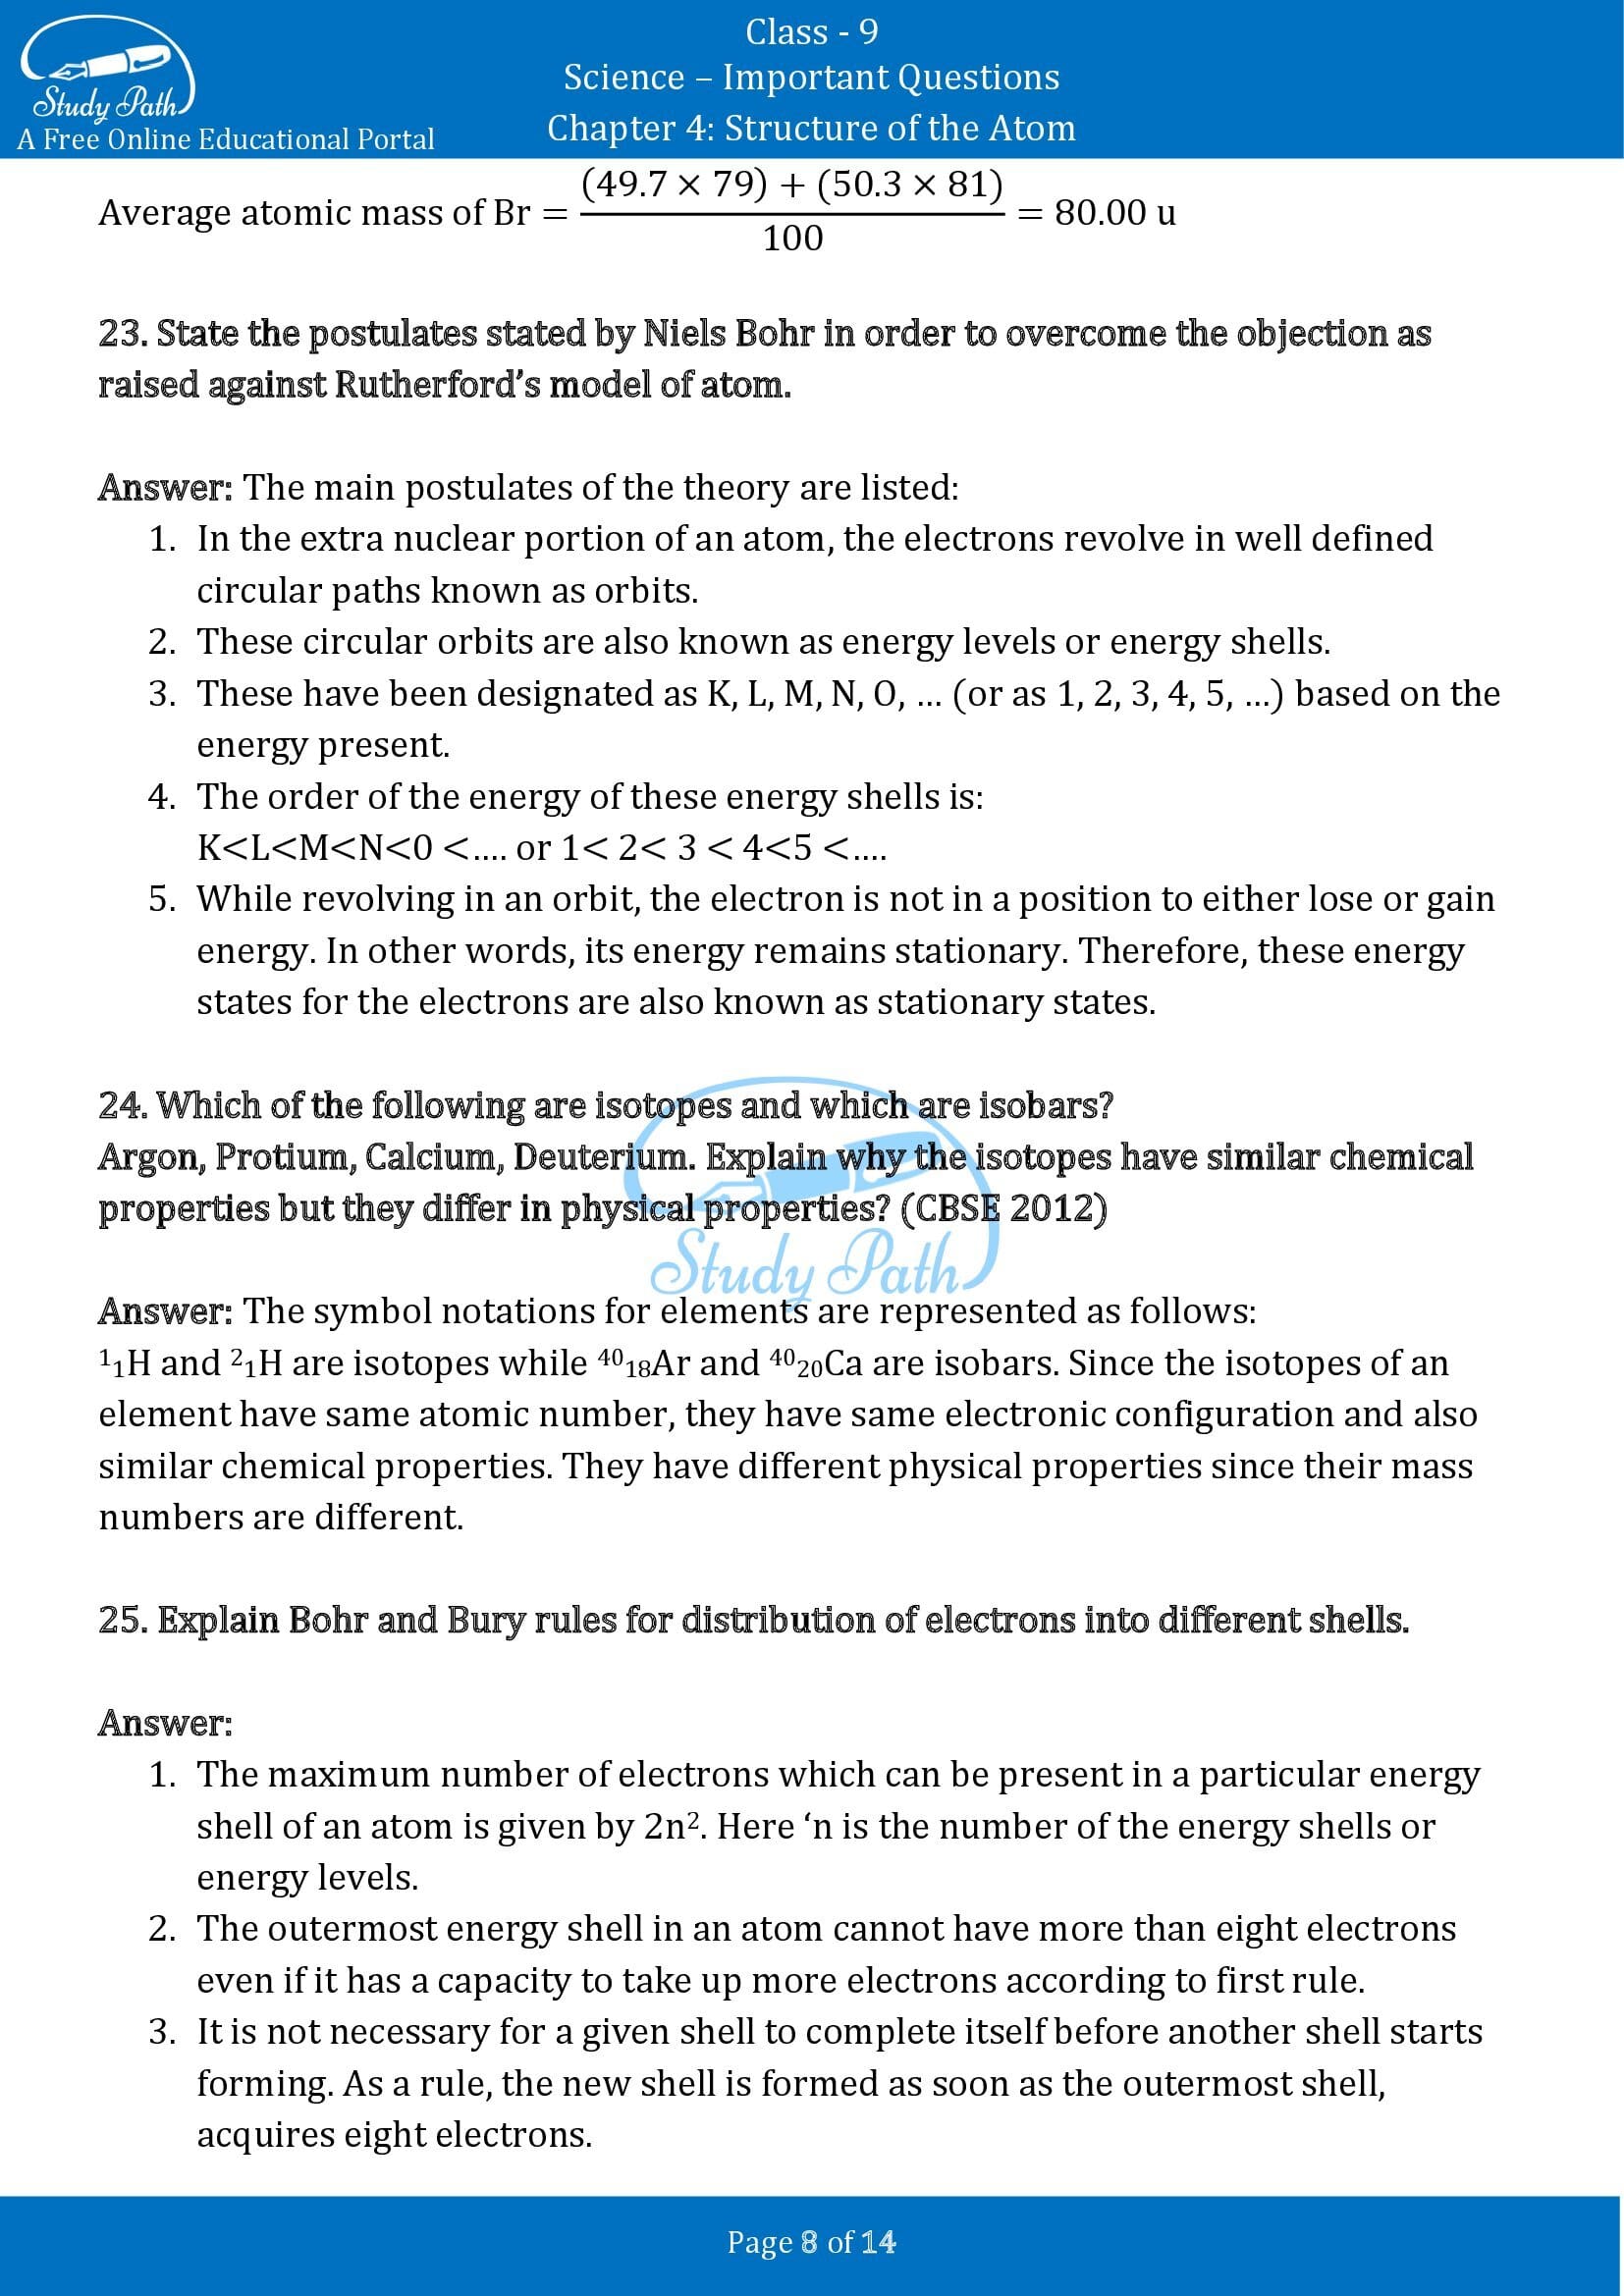 Important Questions for Class 9 Science Chapter 4 Structure of the Atom 00008